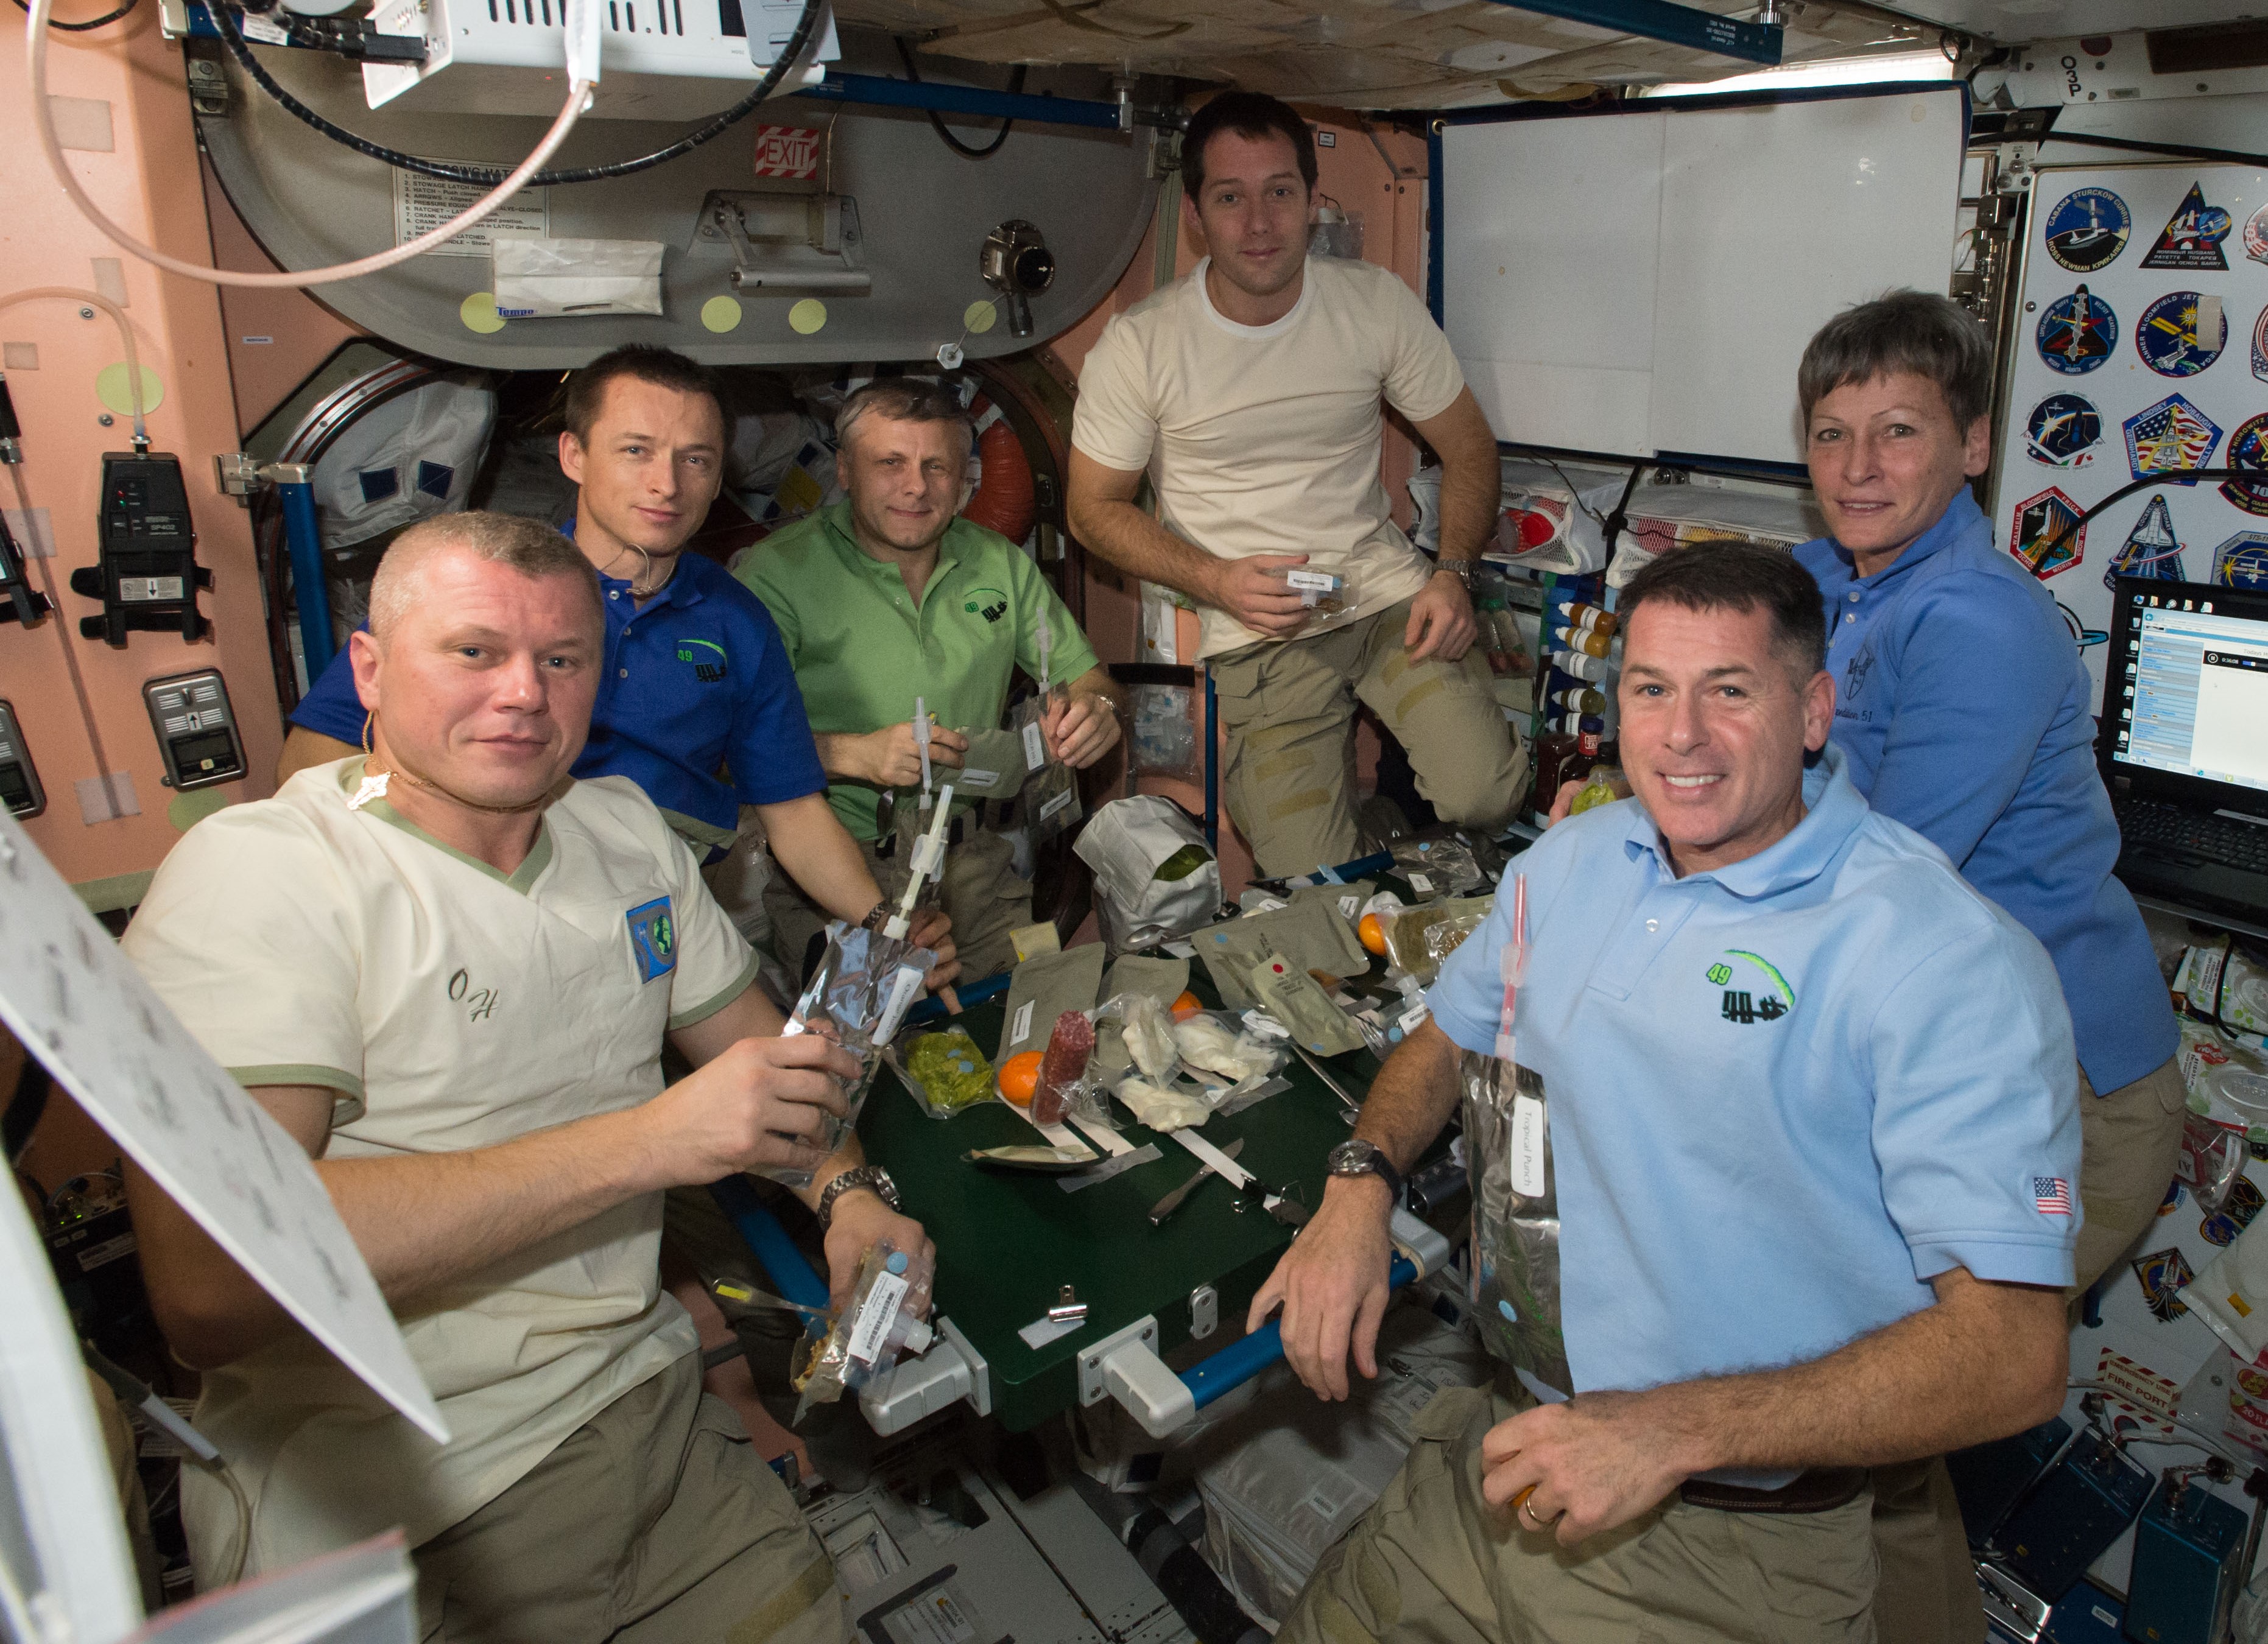 Expedition 50 crew members Oleg V. Novitsky, left, Sergei N. Ryzhikov, and Andrei I. Borisenko of Roscosmos, Thomas G. Pesquet of the European Space Agency, and NASA astronauts R. Shane Kimbrough and Peggy A. Whitson pose before the Thanksgiving dinner table